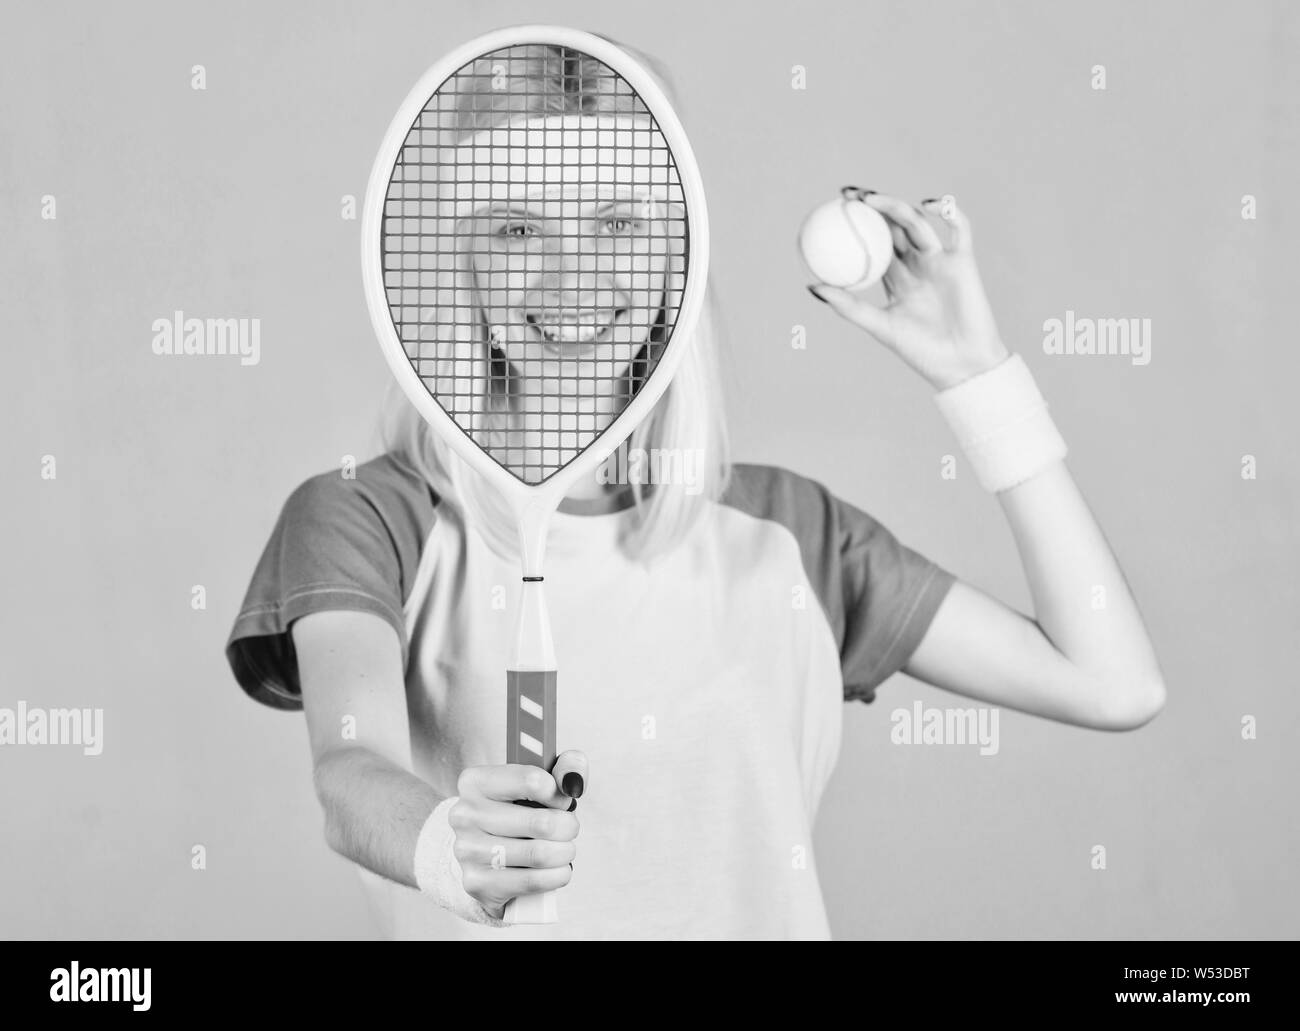 Tennis club concept. Tennis sport and entertainment. Active leisure and hobby. Girl fit slim blonde play tennis. Sport for maintaining health. Active lifestyle. Woman hold tennis racket in hand. Stock Photo